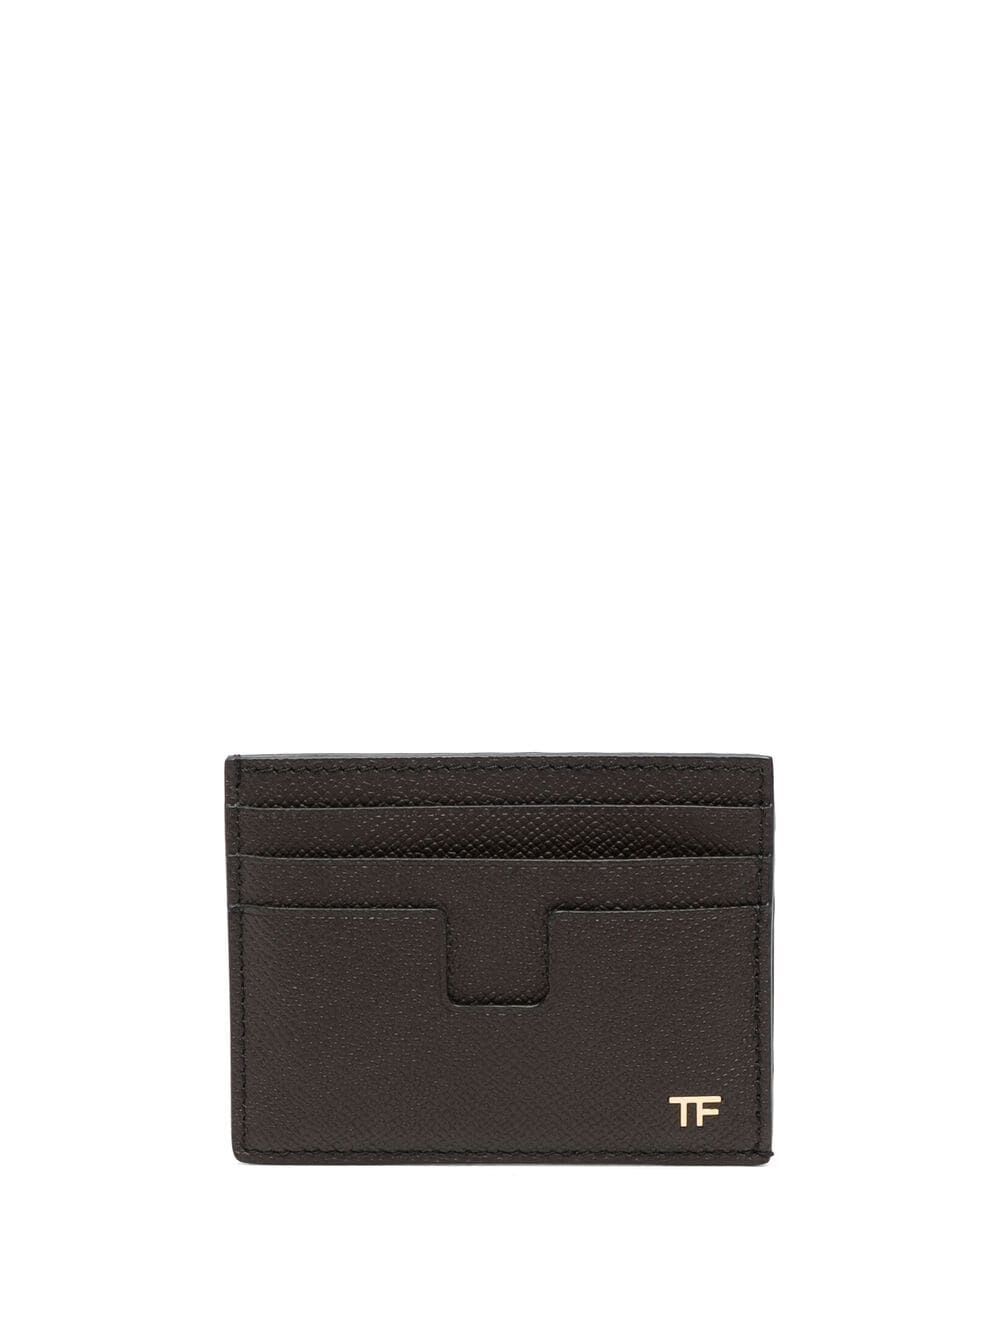 Tom Ford Card Holder Accessories In Chocolate